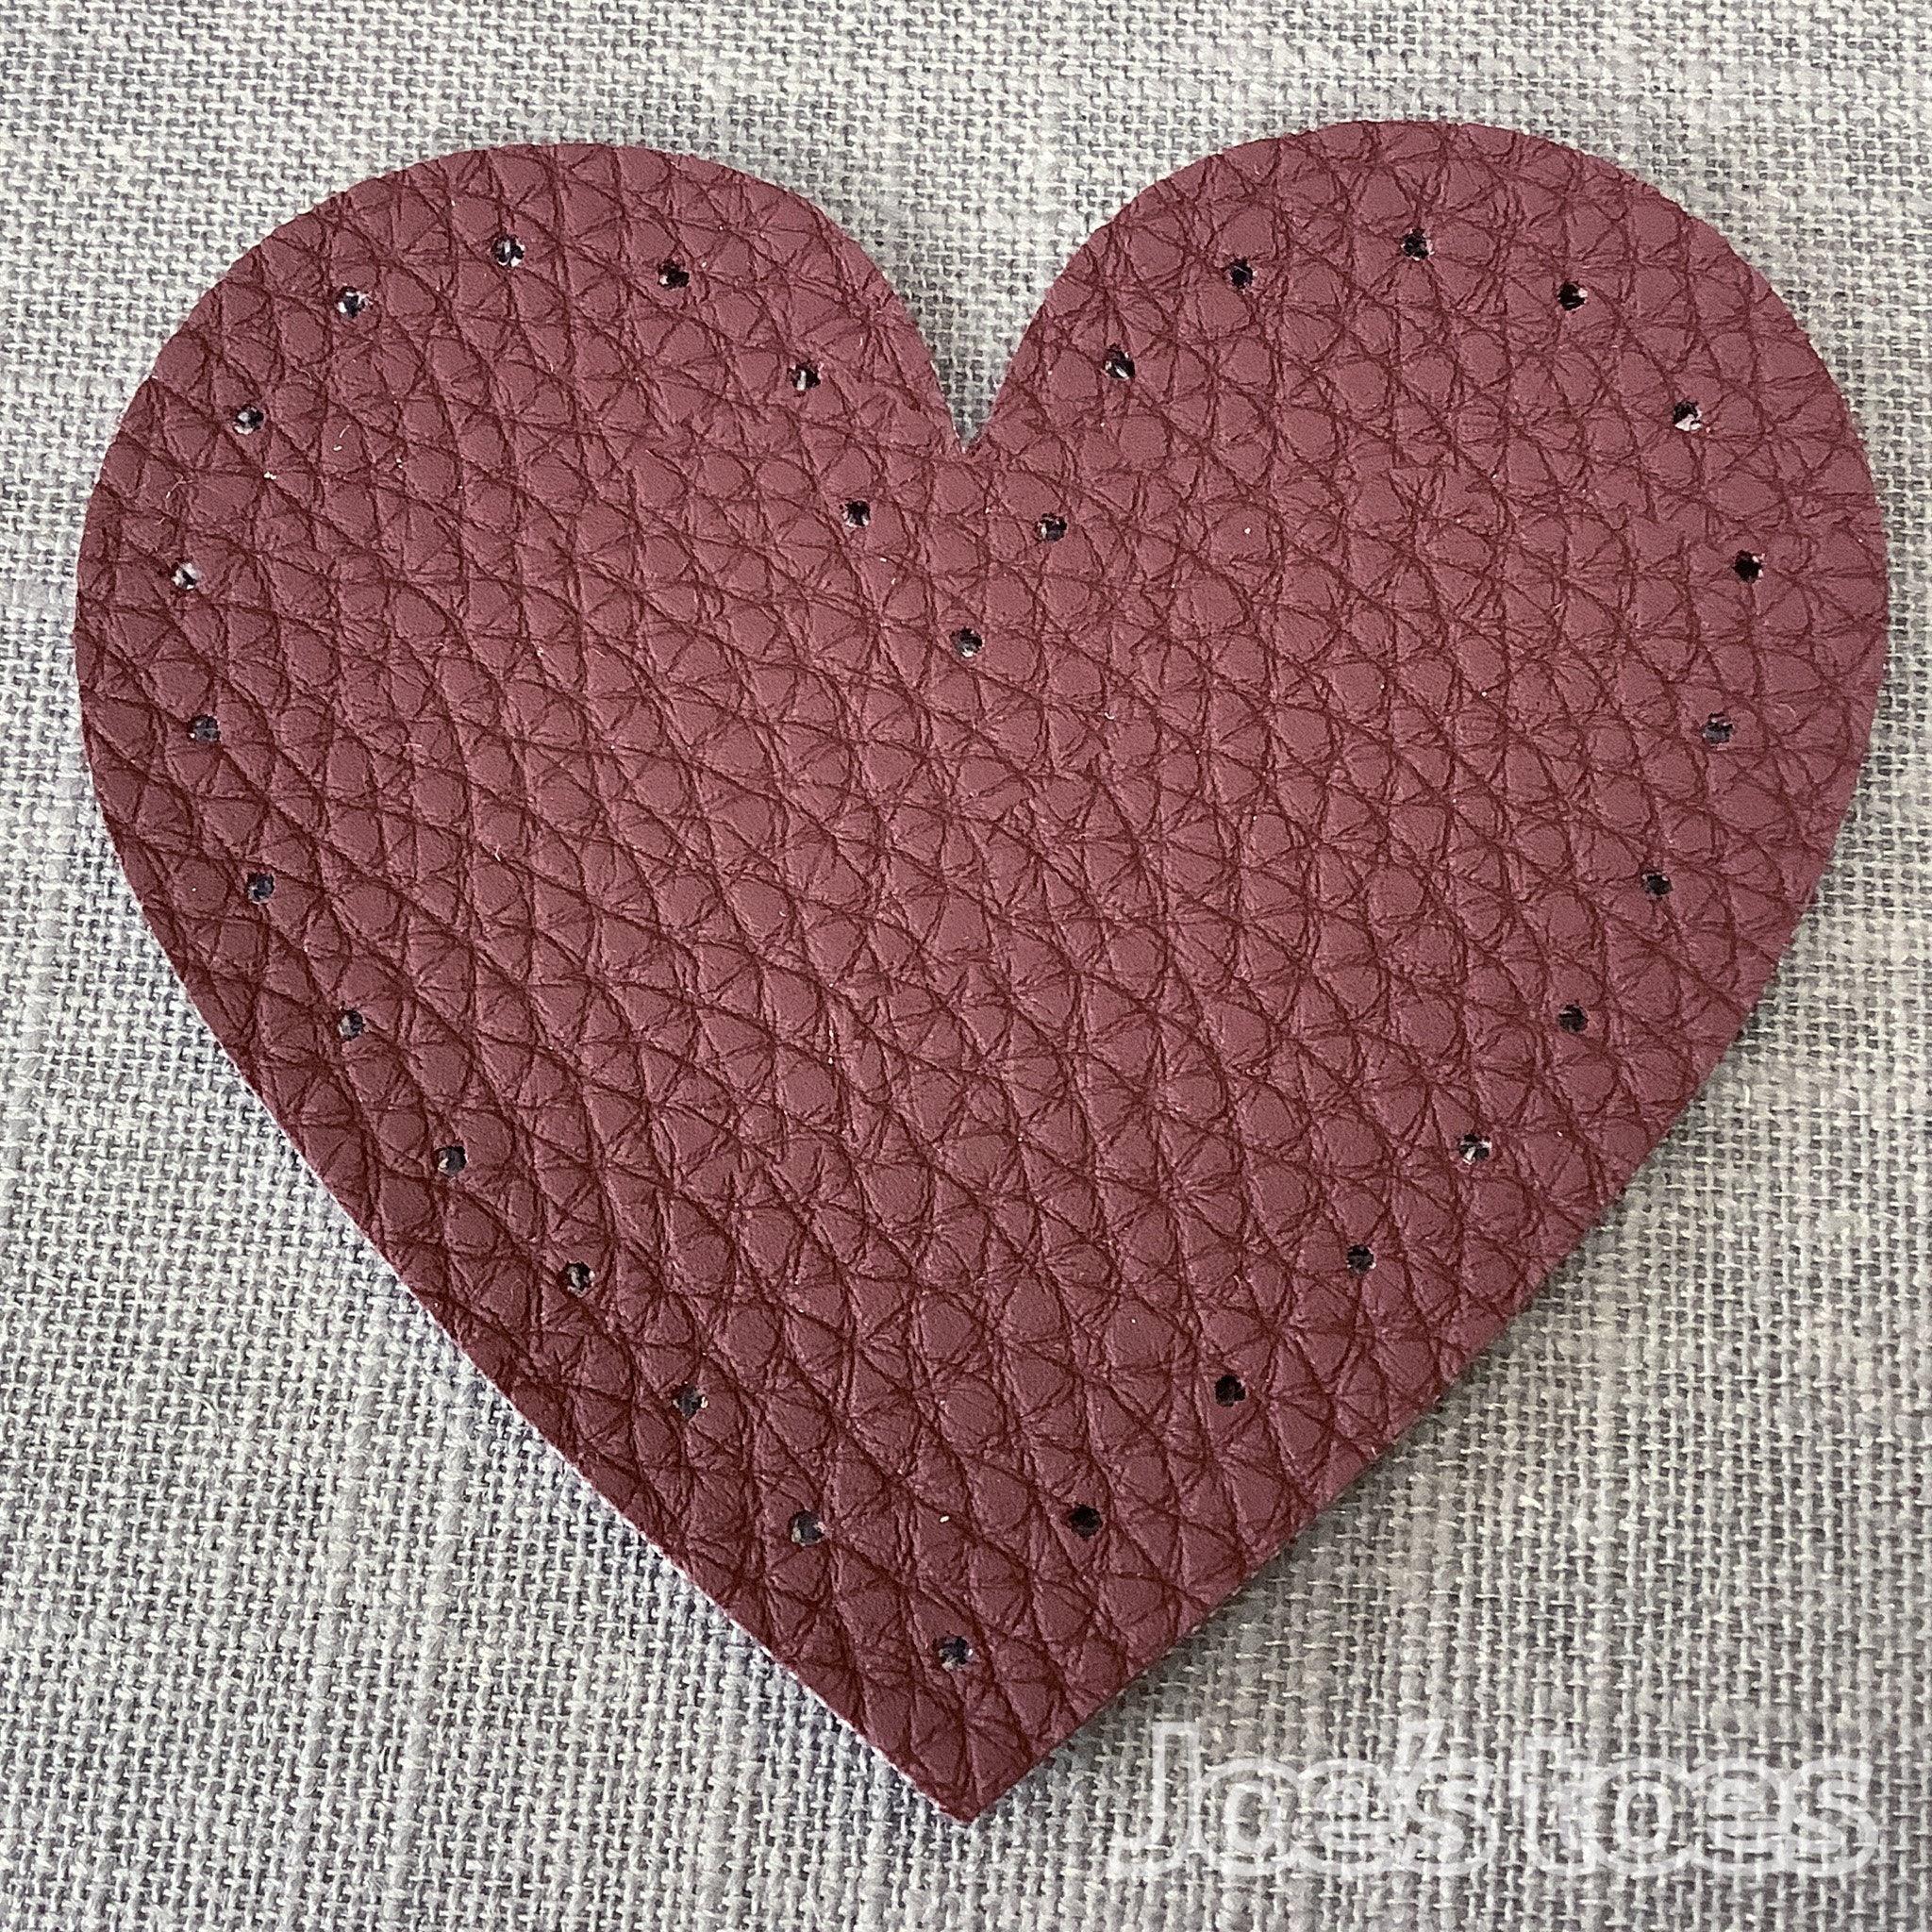 Crochet Heart Elbow Patches - Make